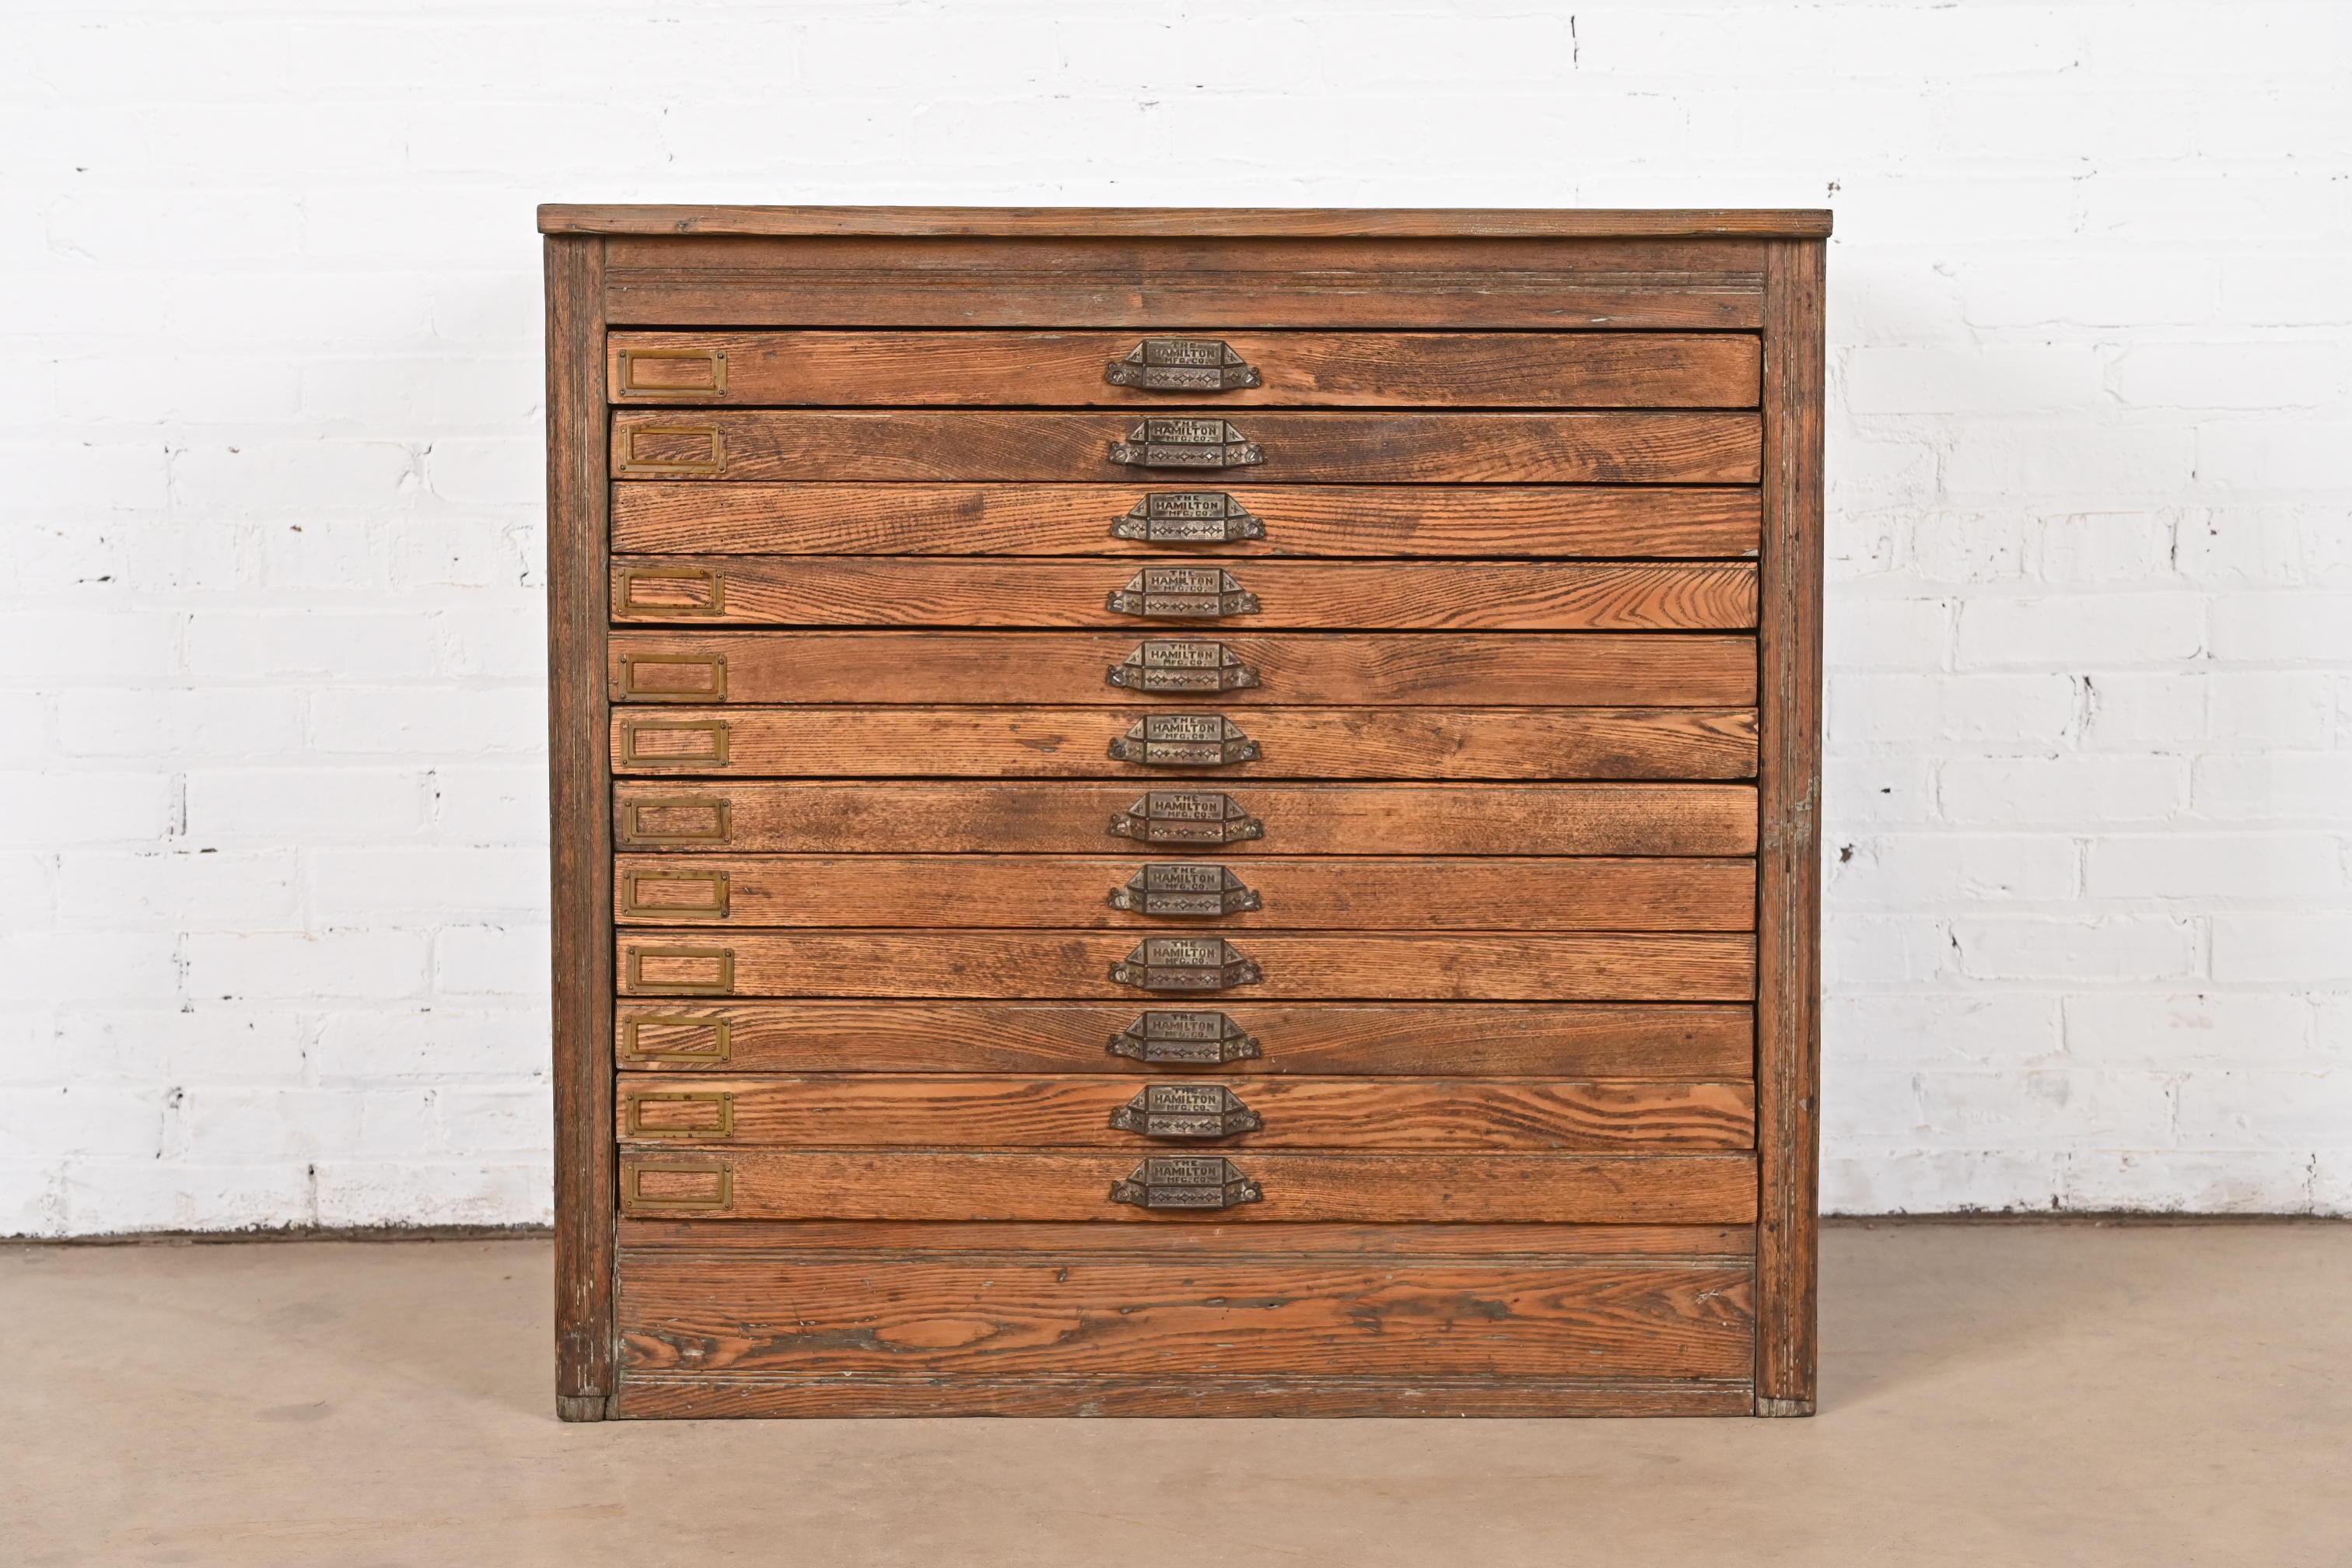 A rare and exceptional antique Arts & Crafts architect's blueprint or map flat file cabinet

By Hamilton Manufacturing Co.

USA, Circa 1900

Solid pine, with original iron hardware.

Measures: 35.75